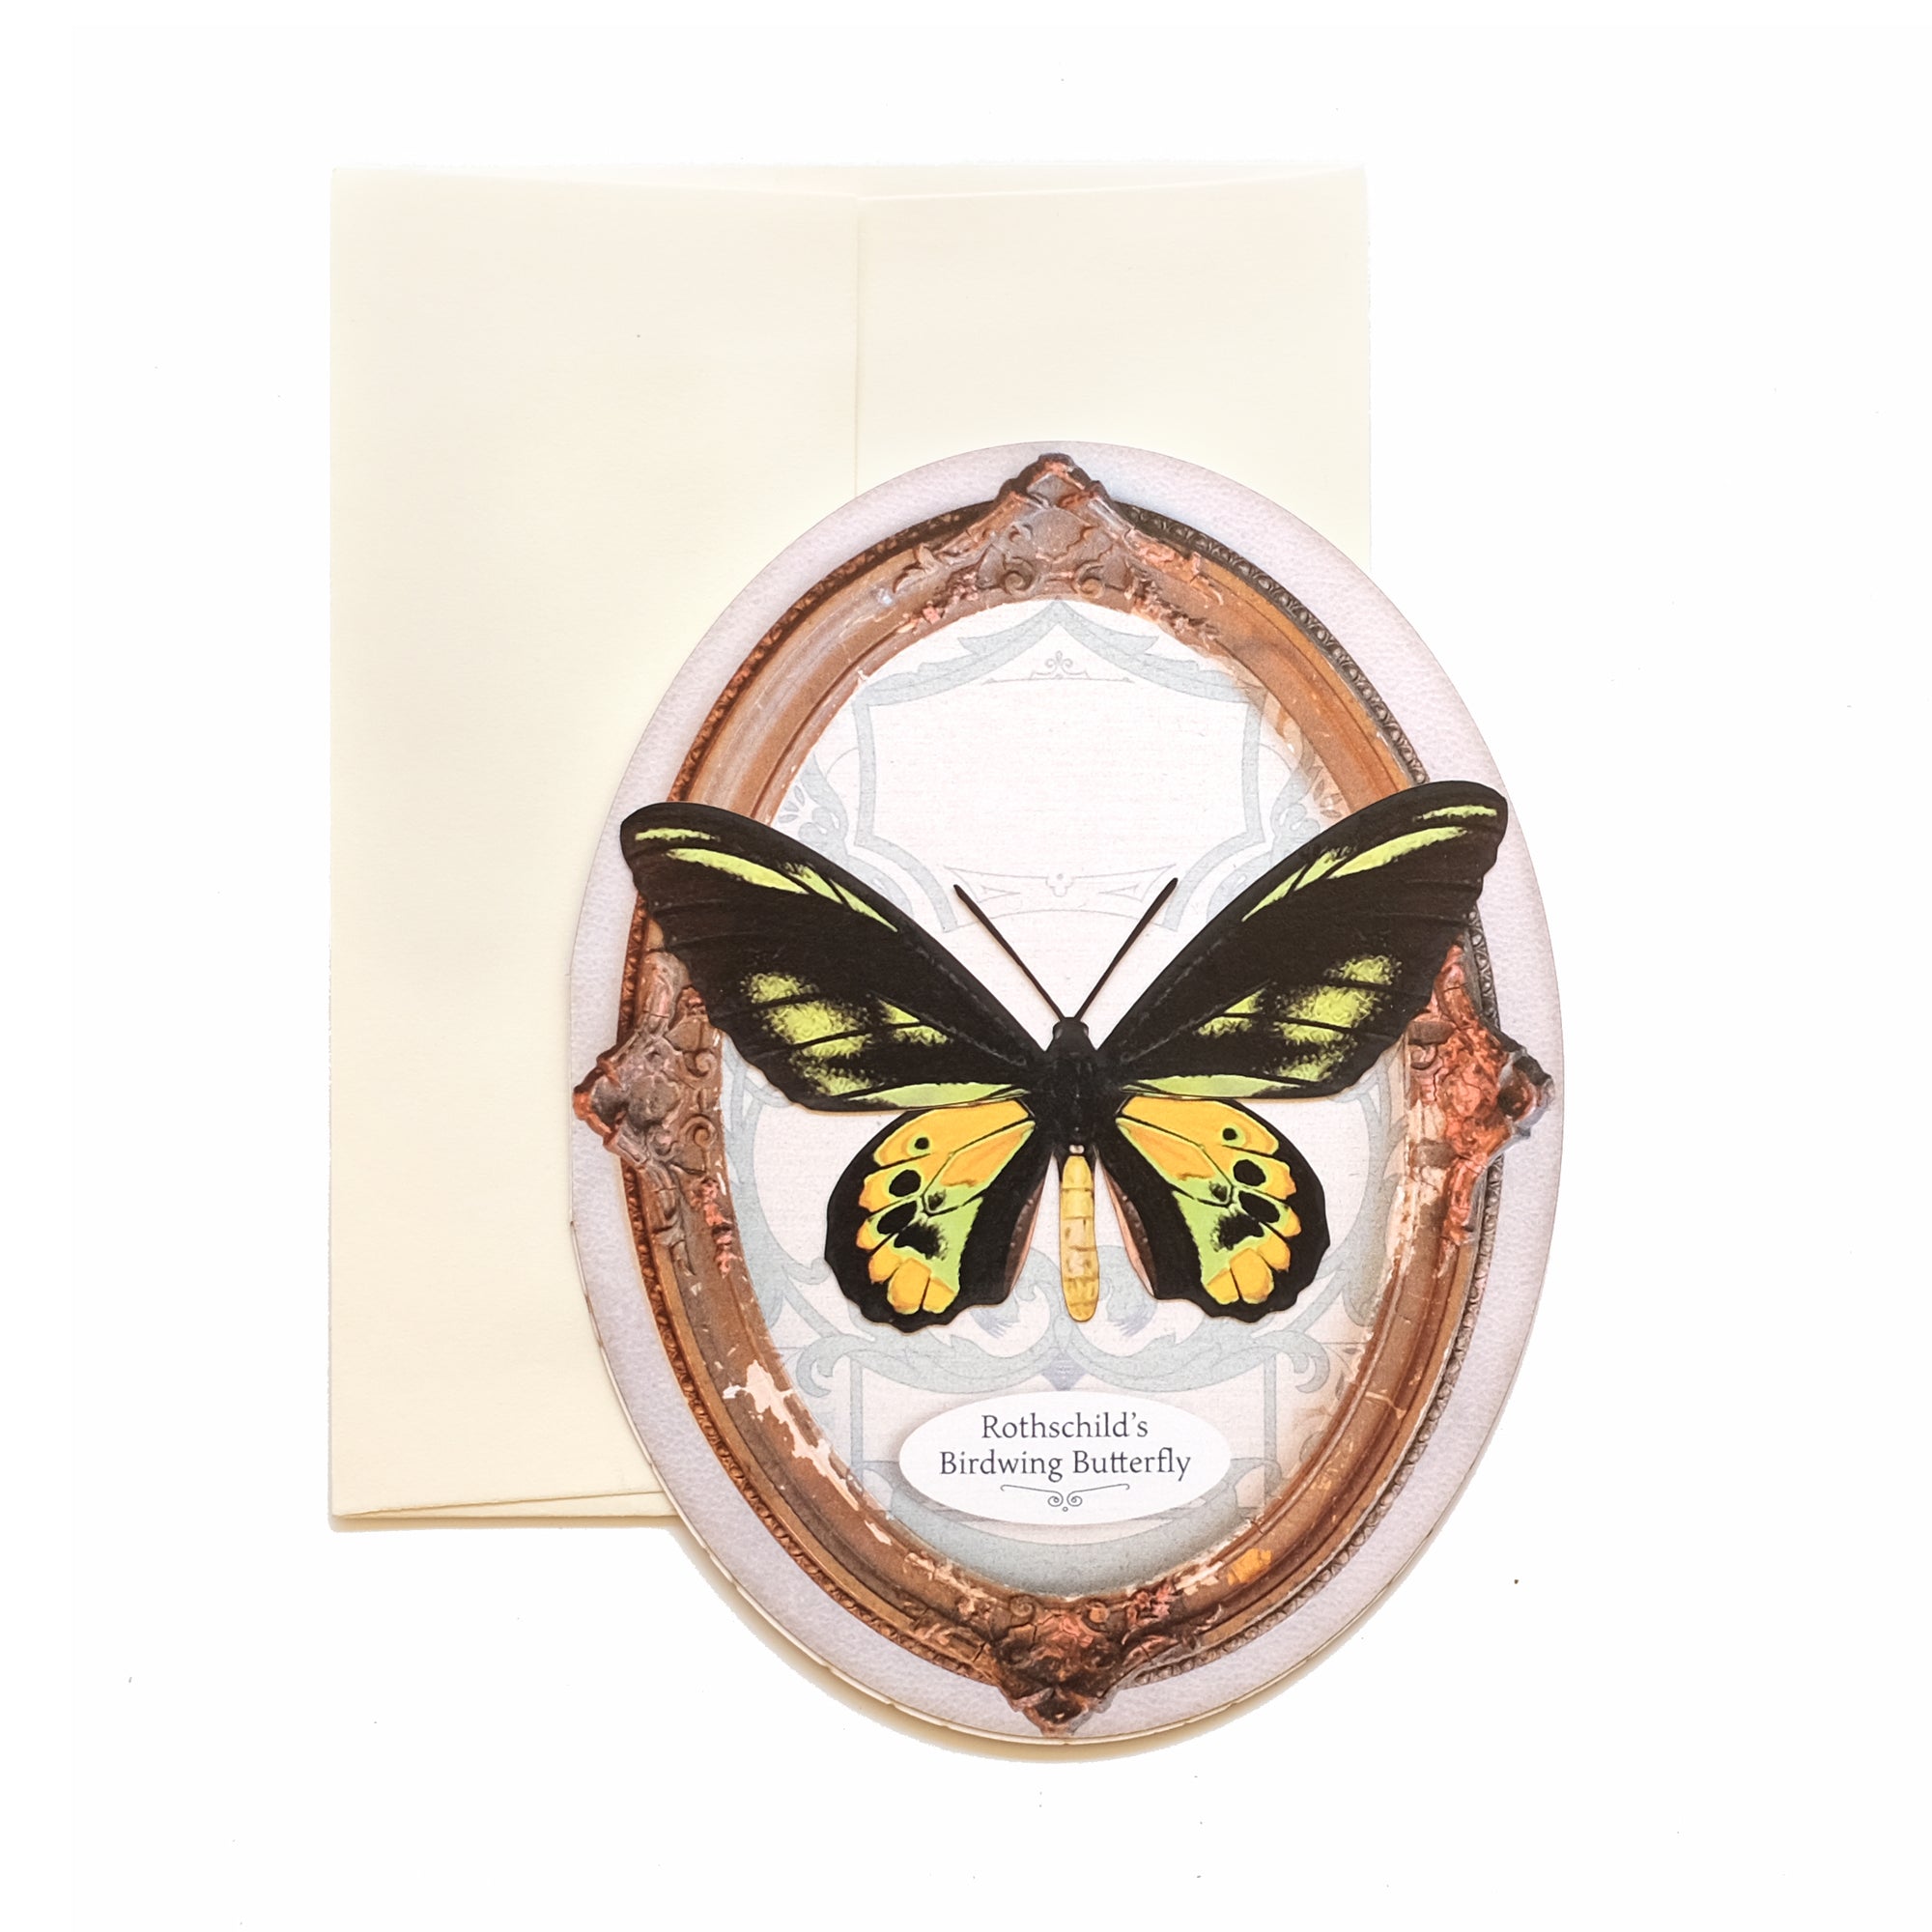 Rothschild's Birdwing Butterfly Oval Greeting Card - Set of 4 - Reseller Wholesale